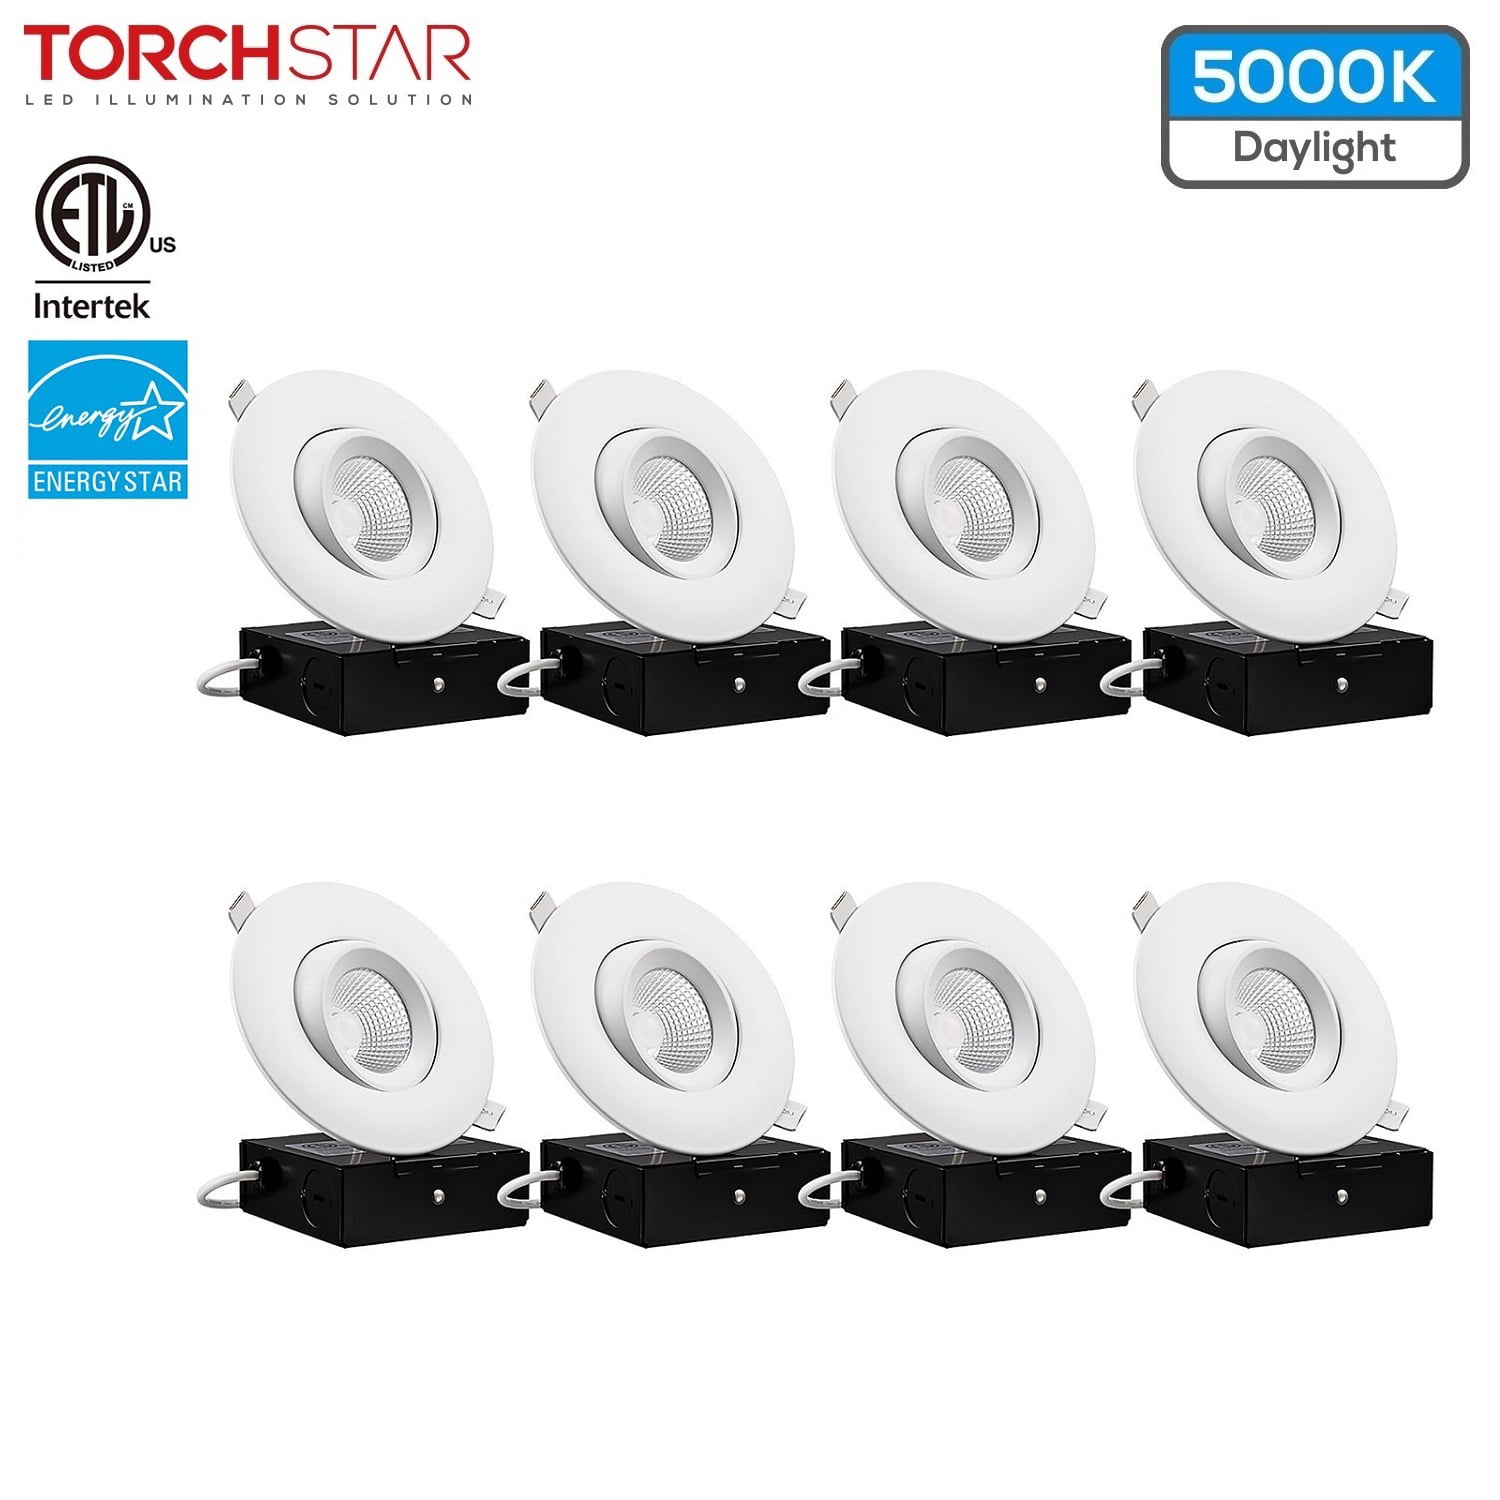 5000K TORCHSTAR 12 PACK 10W 4 inch Dimmable Recessed LED Downlight High CRI 90 